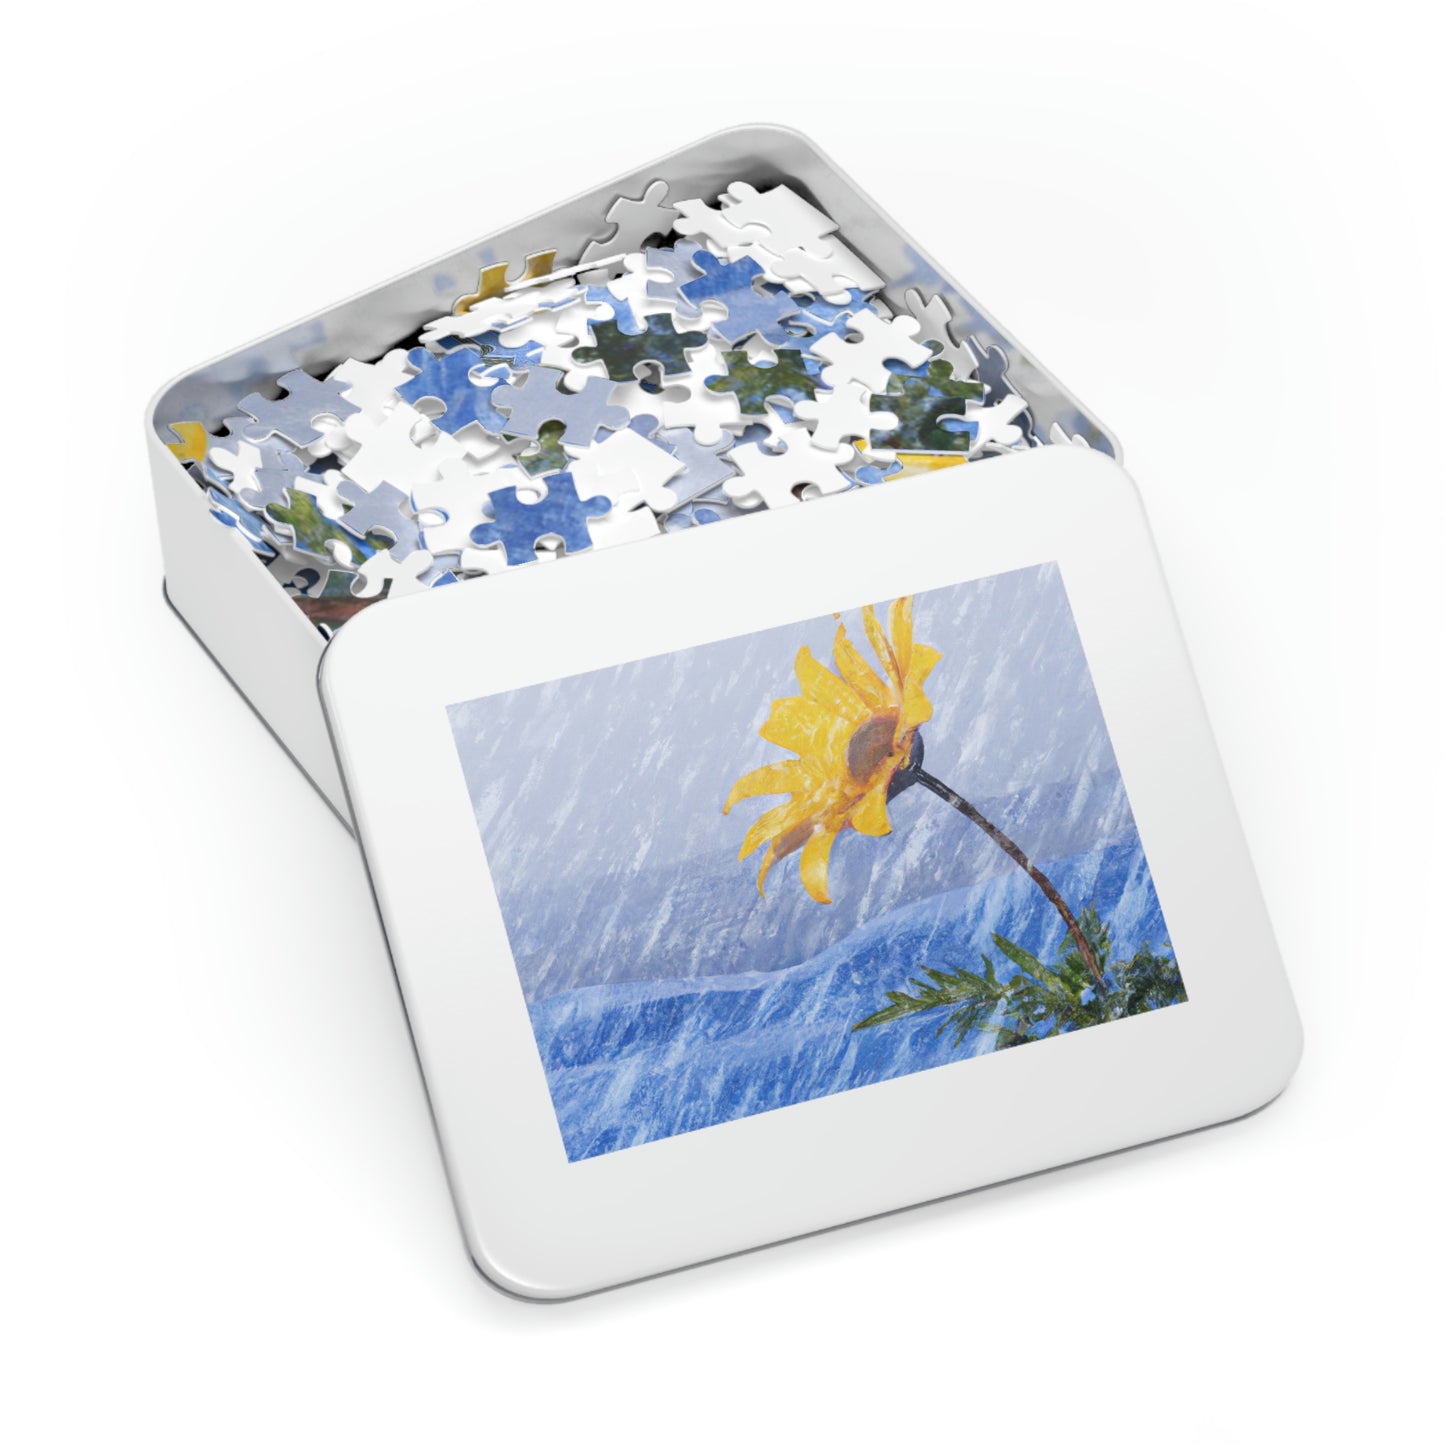 "A Burst of Color in the Glistening White: The Miracle of a Flower Blooms in a Snowstorm" - The Alien Jigsaw Puzzle